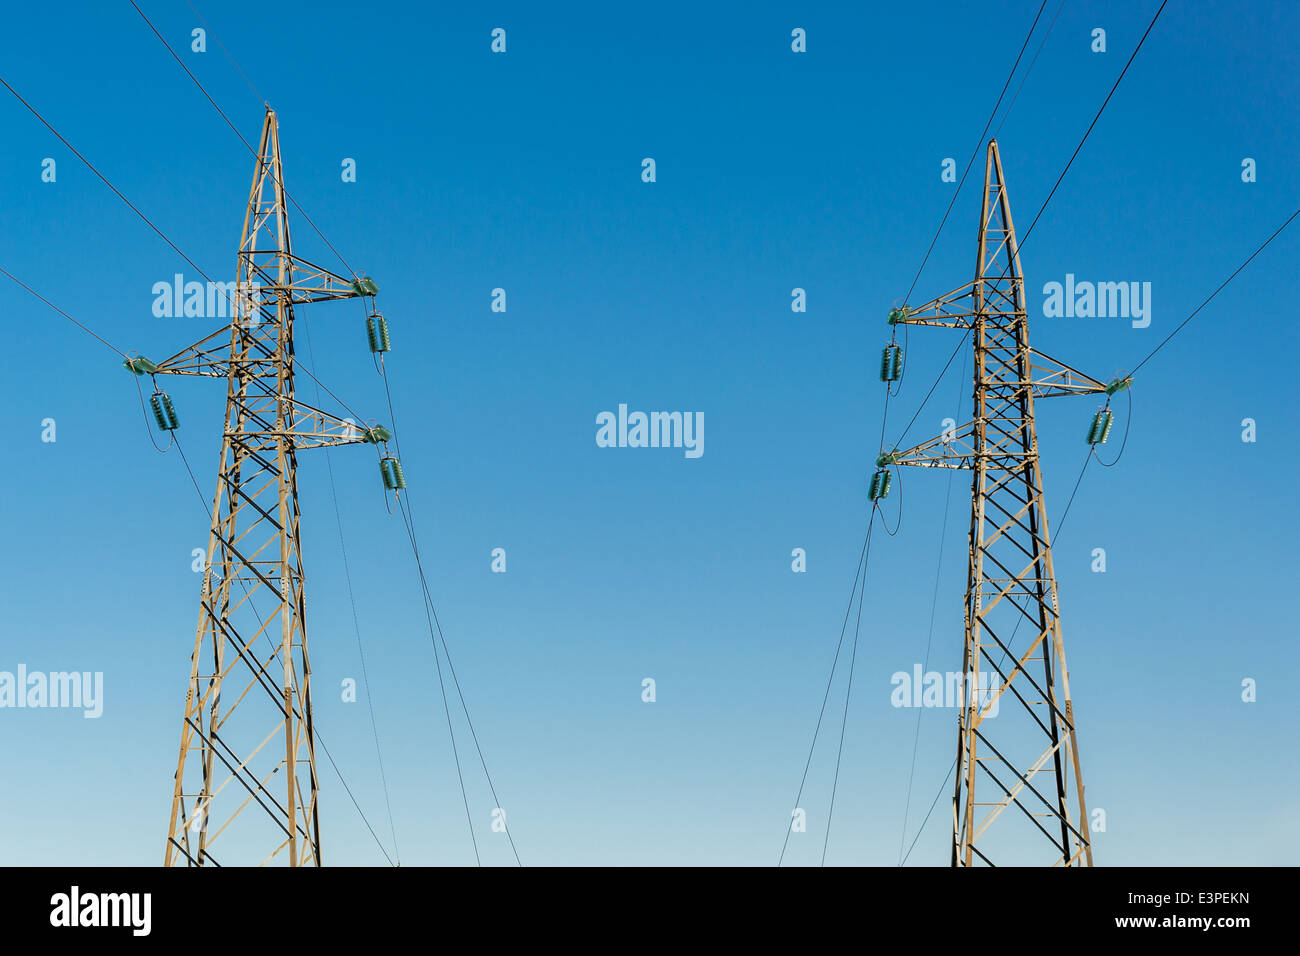 High-voltage electricity pylons, view from below Stock Photo